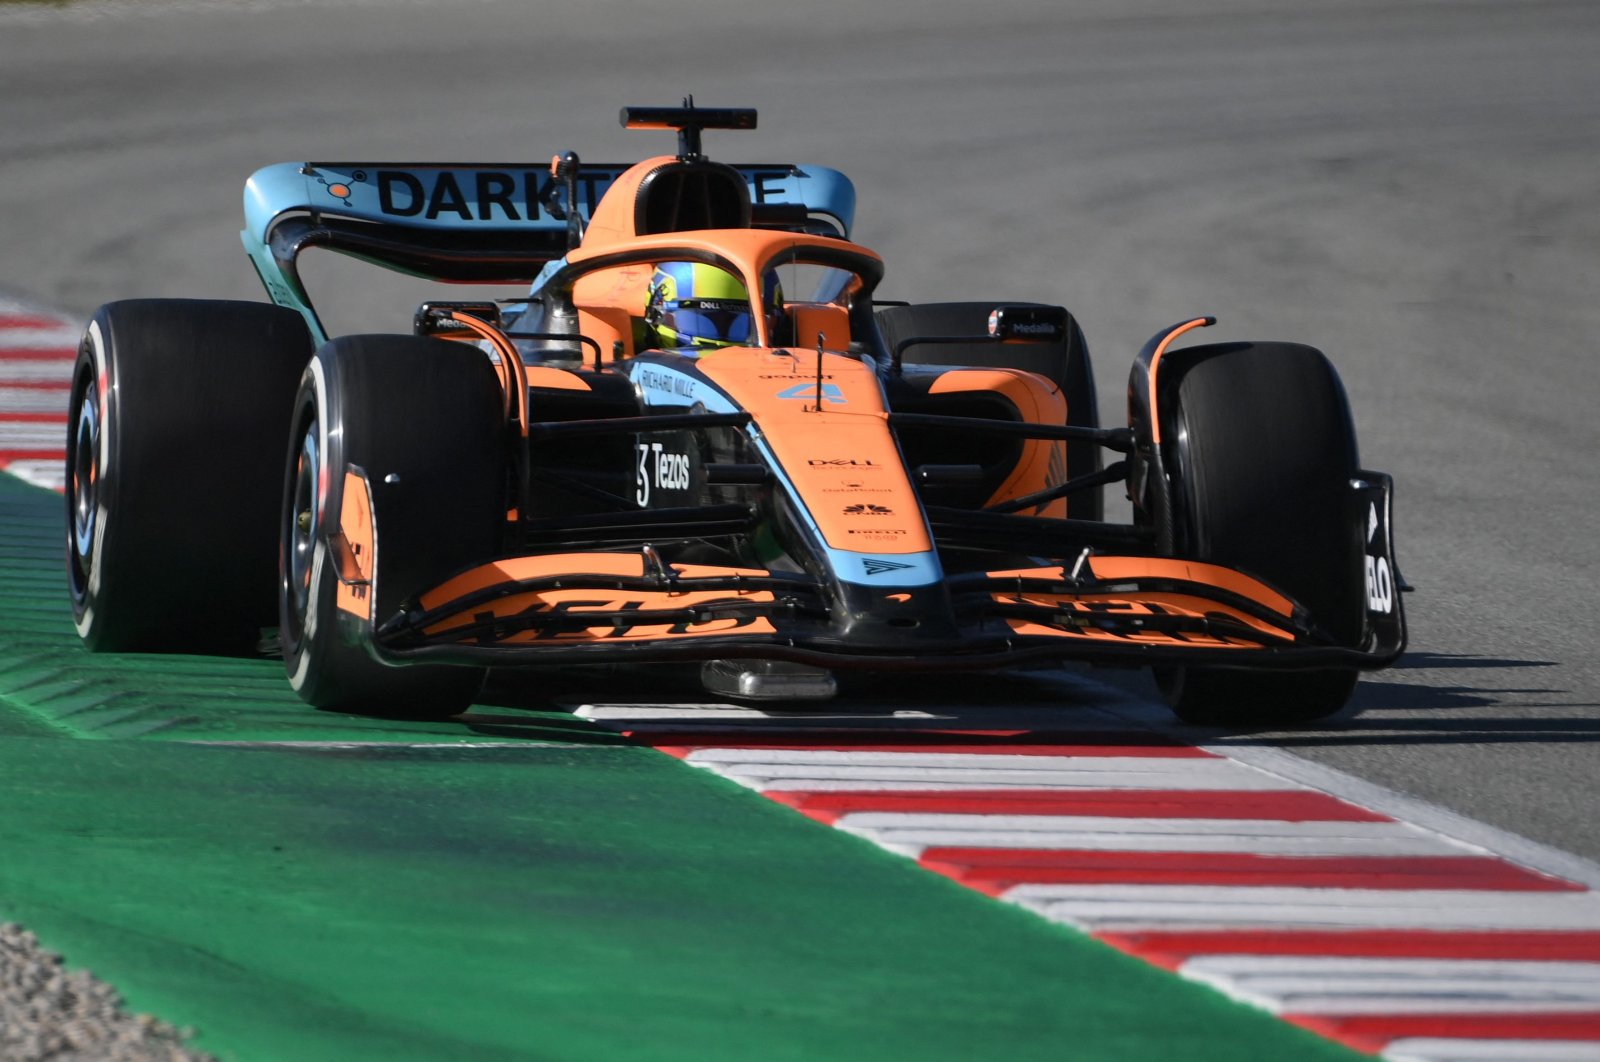 McLaren&#039;s British driver Lando Norris in action during the first day of F1 preseason testing, Barcelona, Spain, Feb. 23, 2022. (AFP Photo)